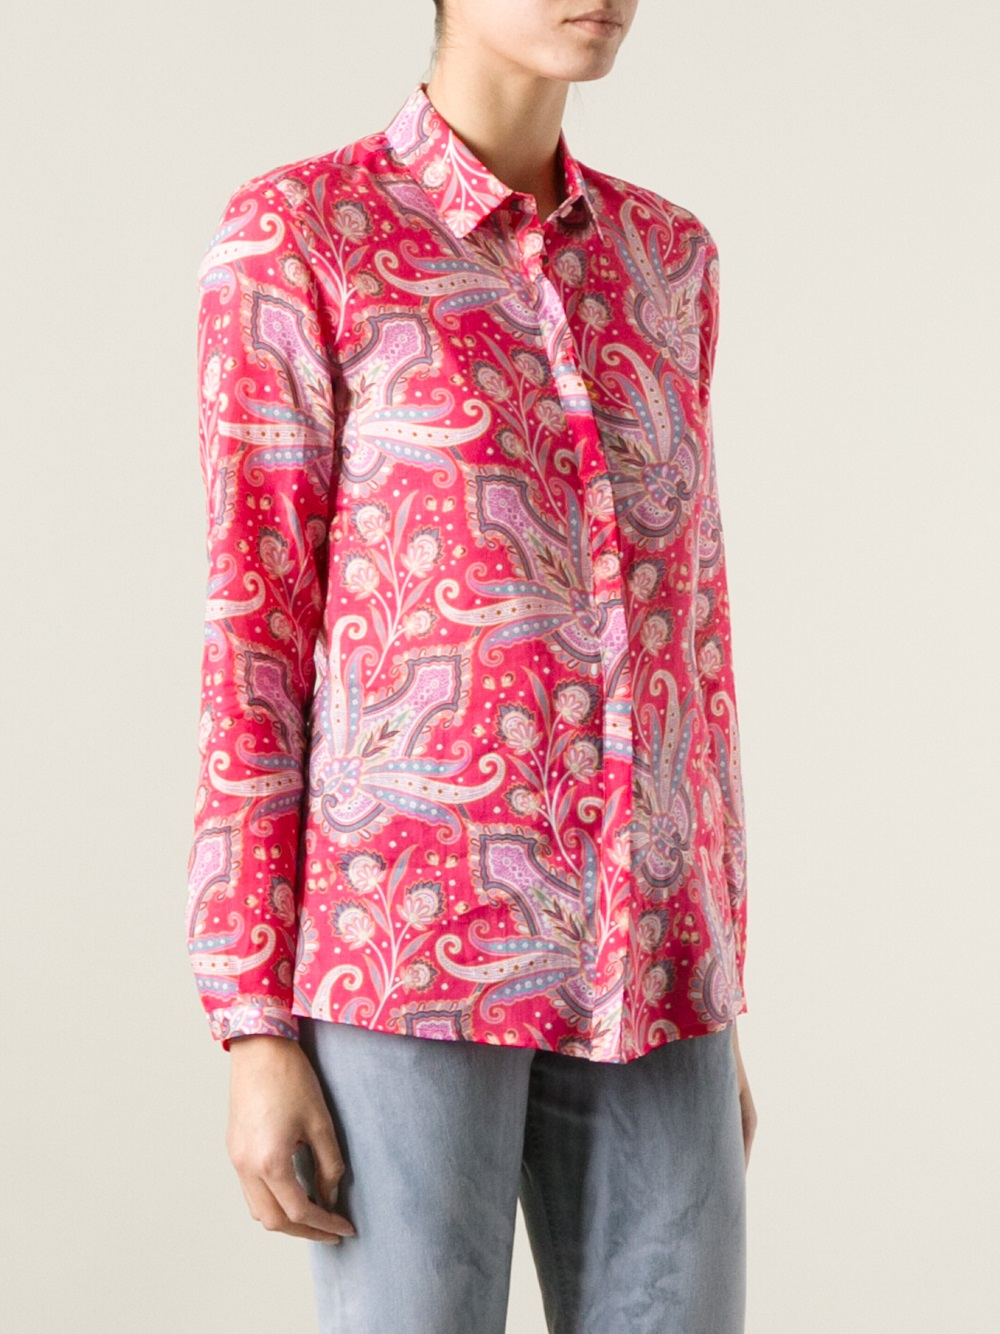 Lyst - Etro Paisley Print Shirt in Pink